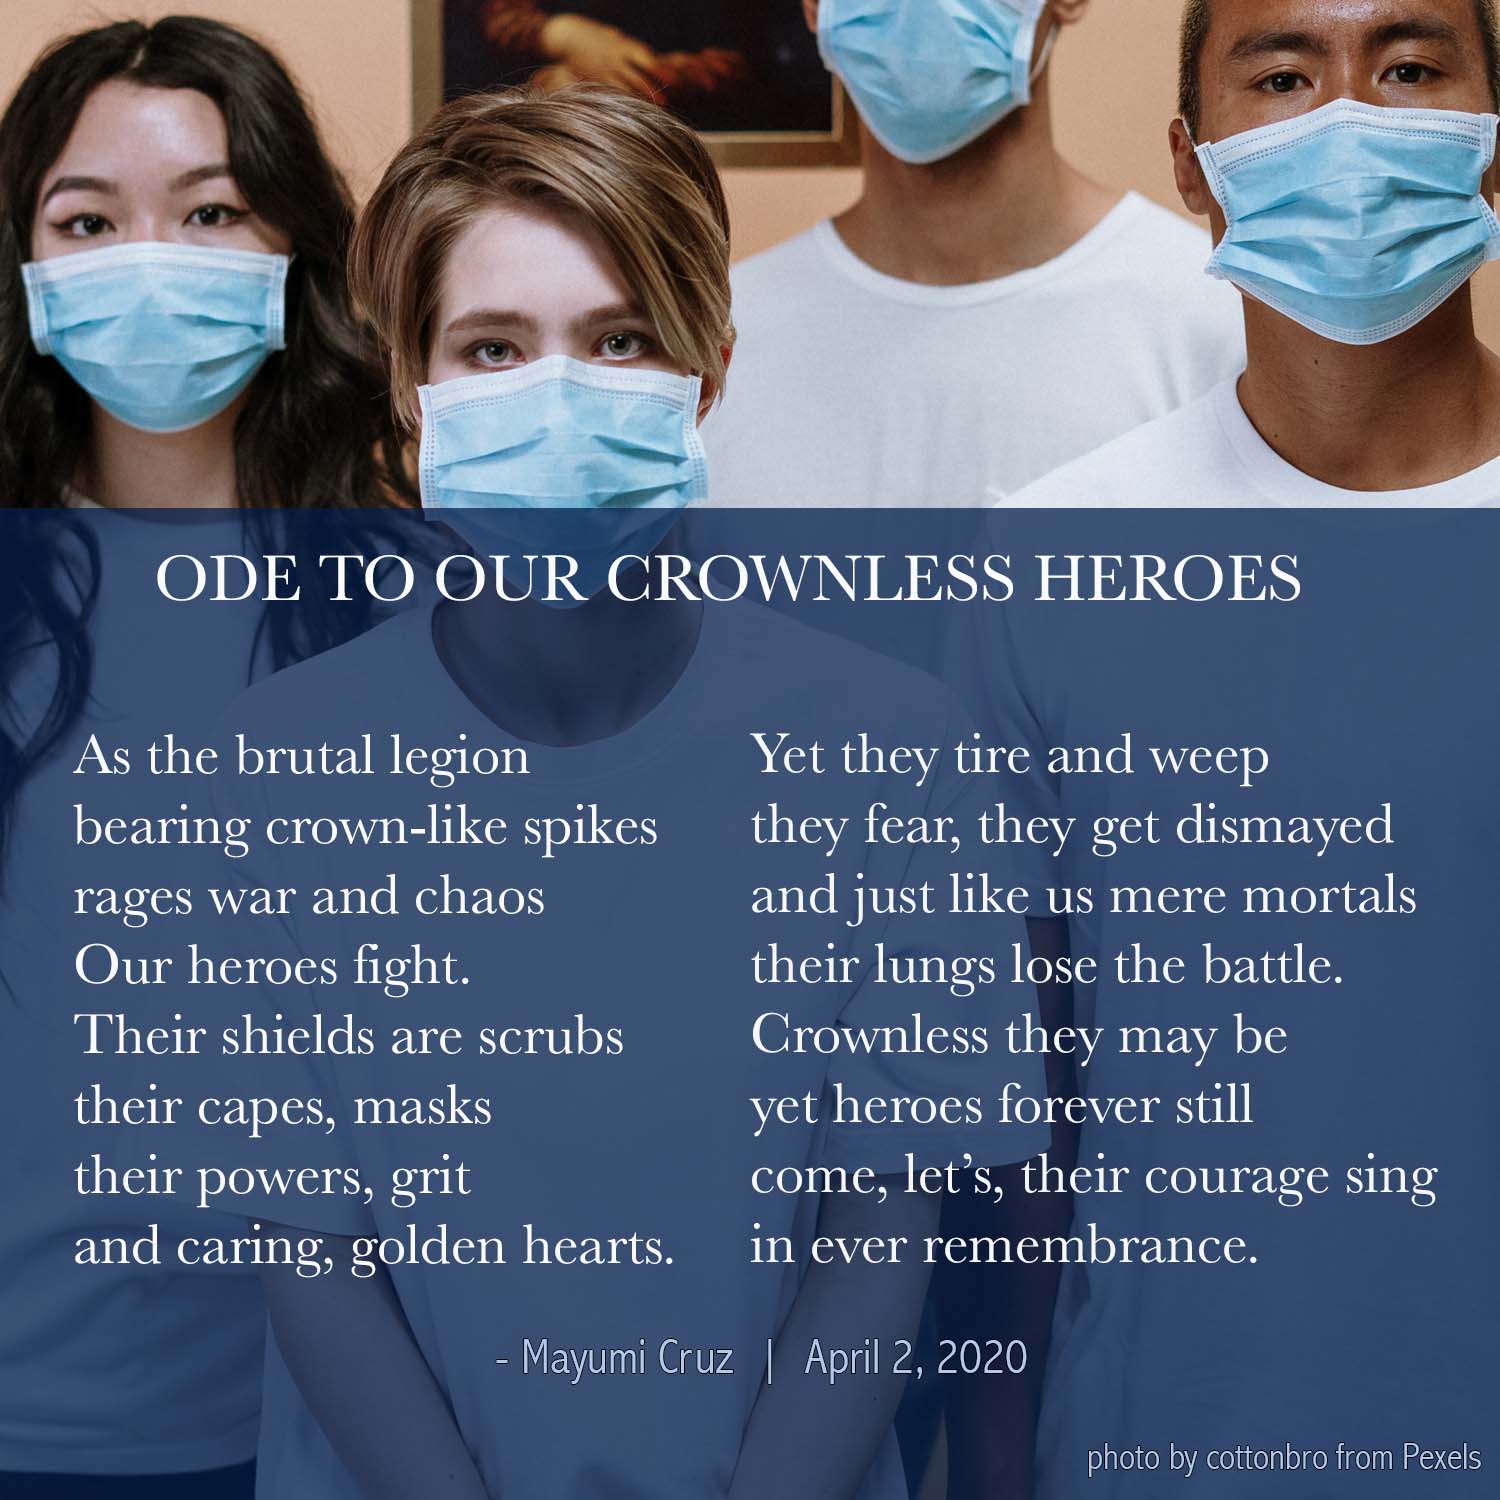 Ode to our crownless heroes